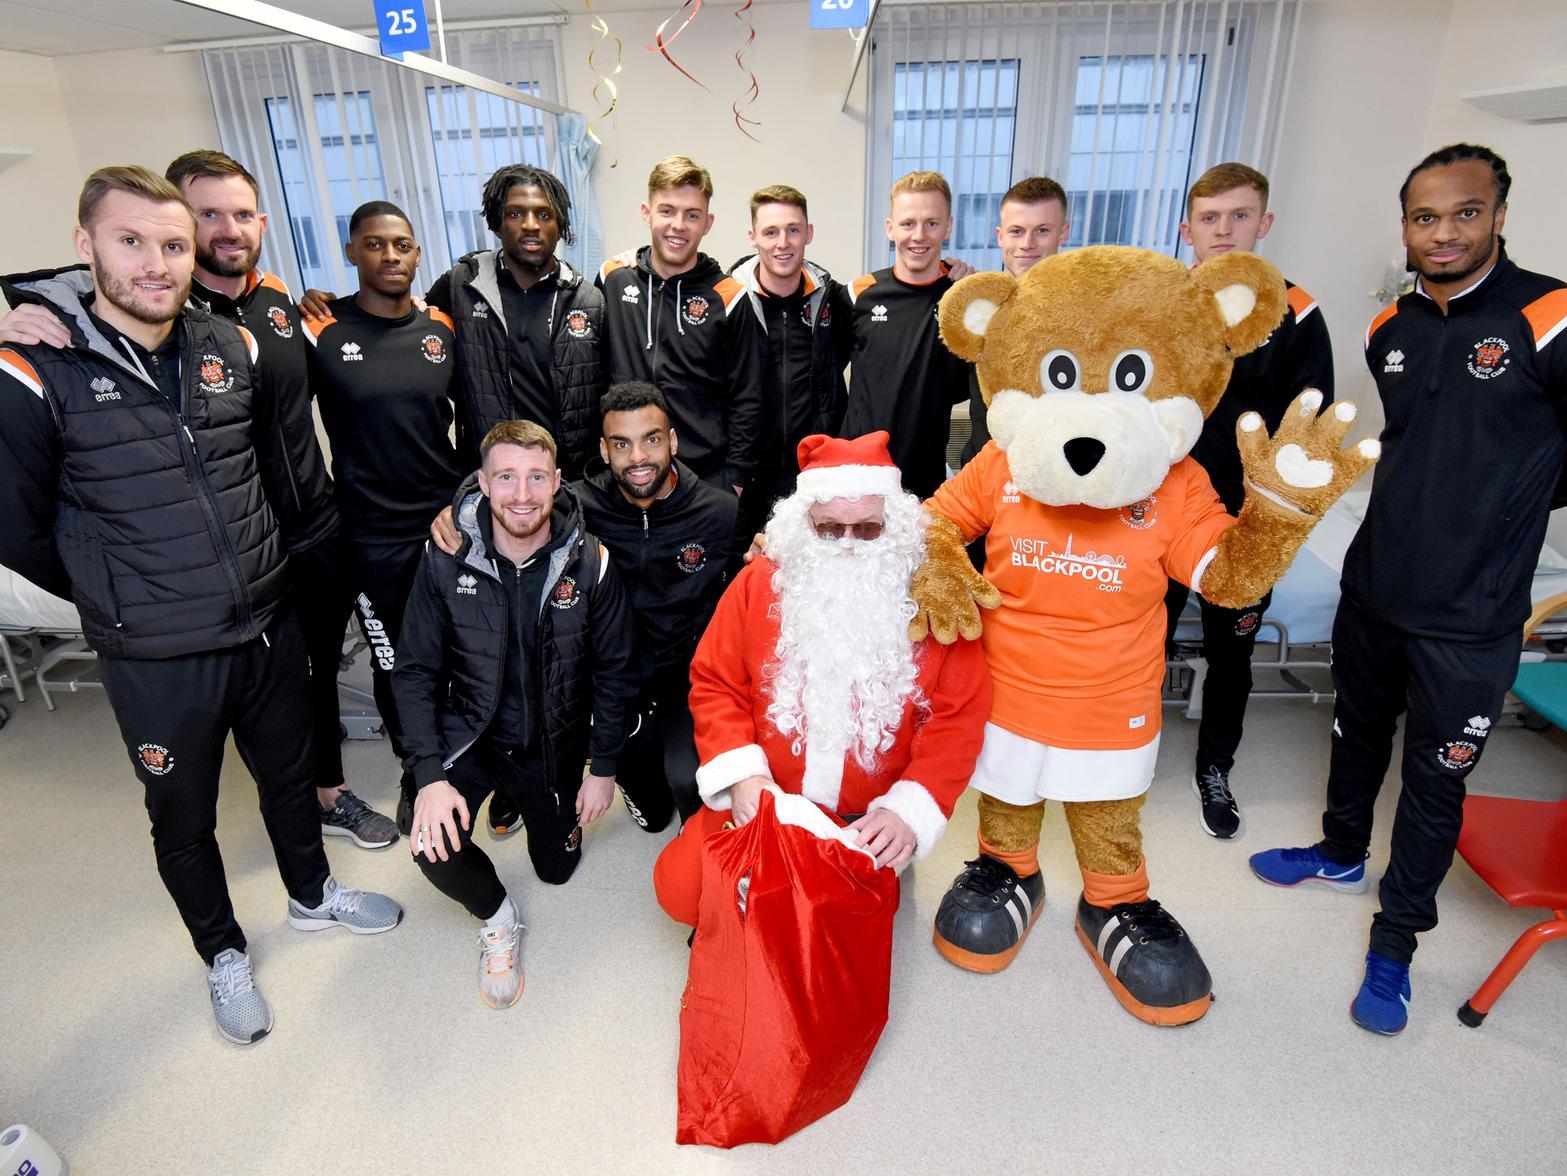 Blackpool FC players visit the children's ward at Blackpool Victoria Hospital